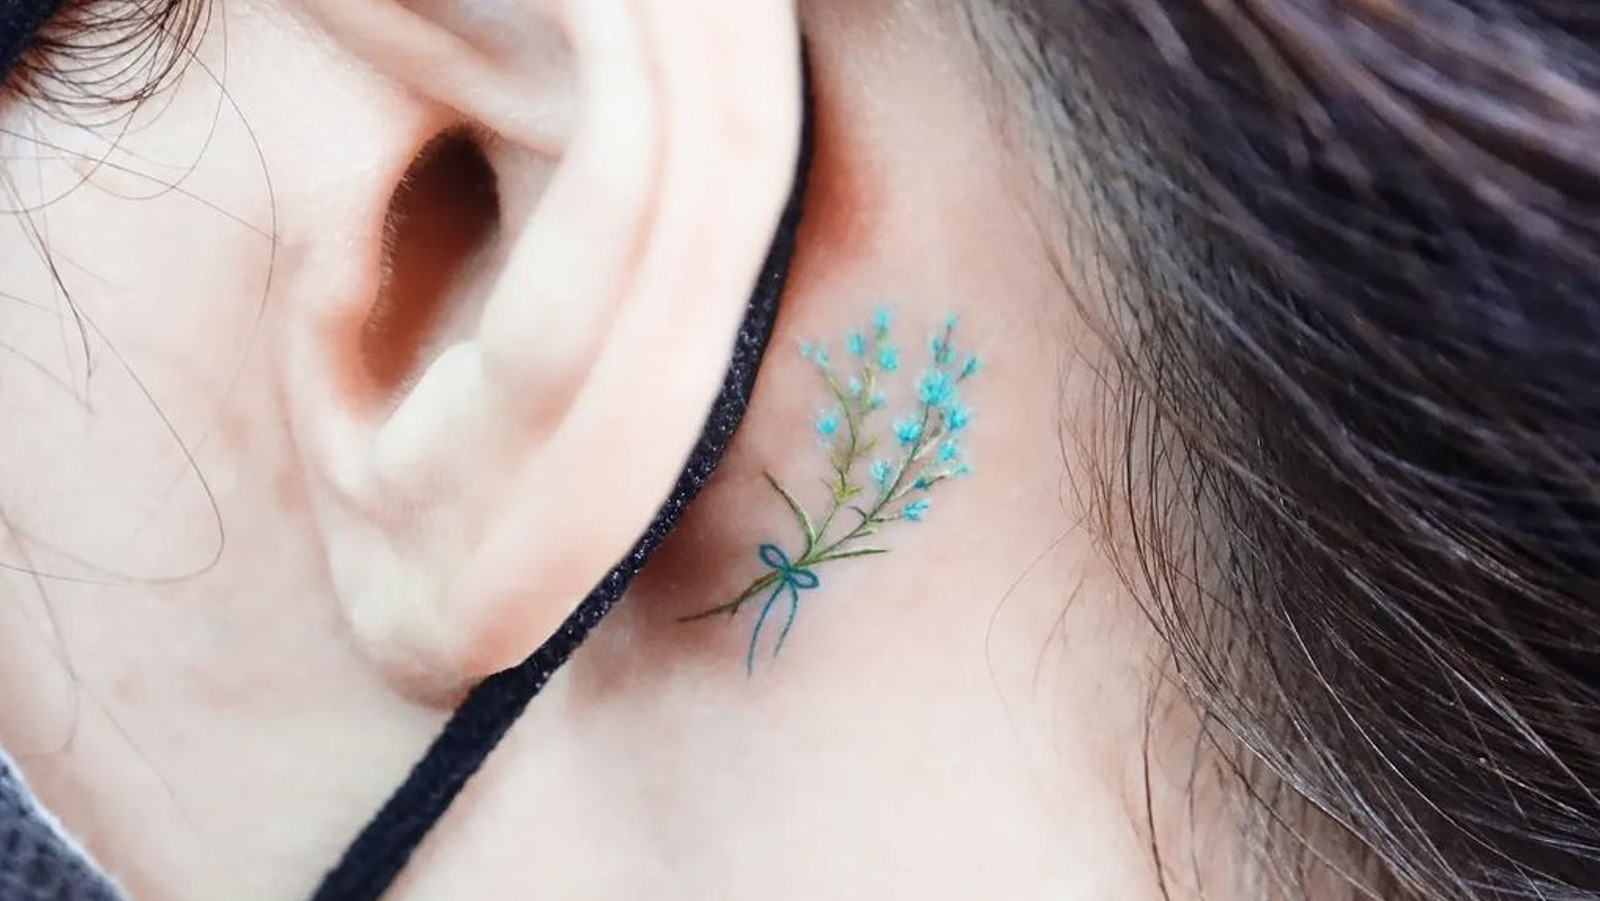 These Dainty Ear Tattoos are Better Than Earrings  SELF